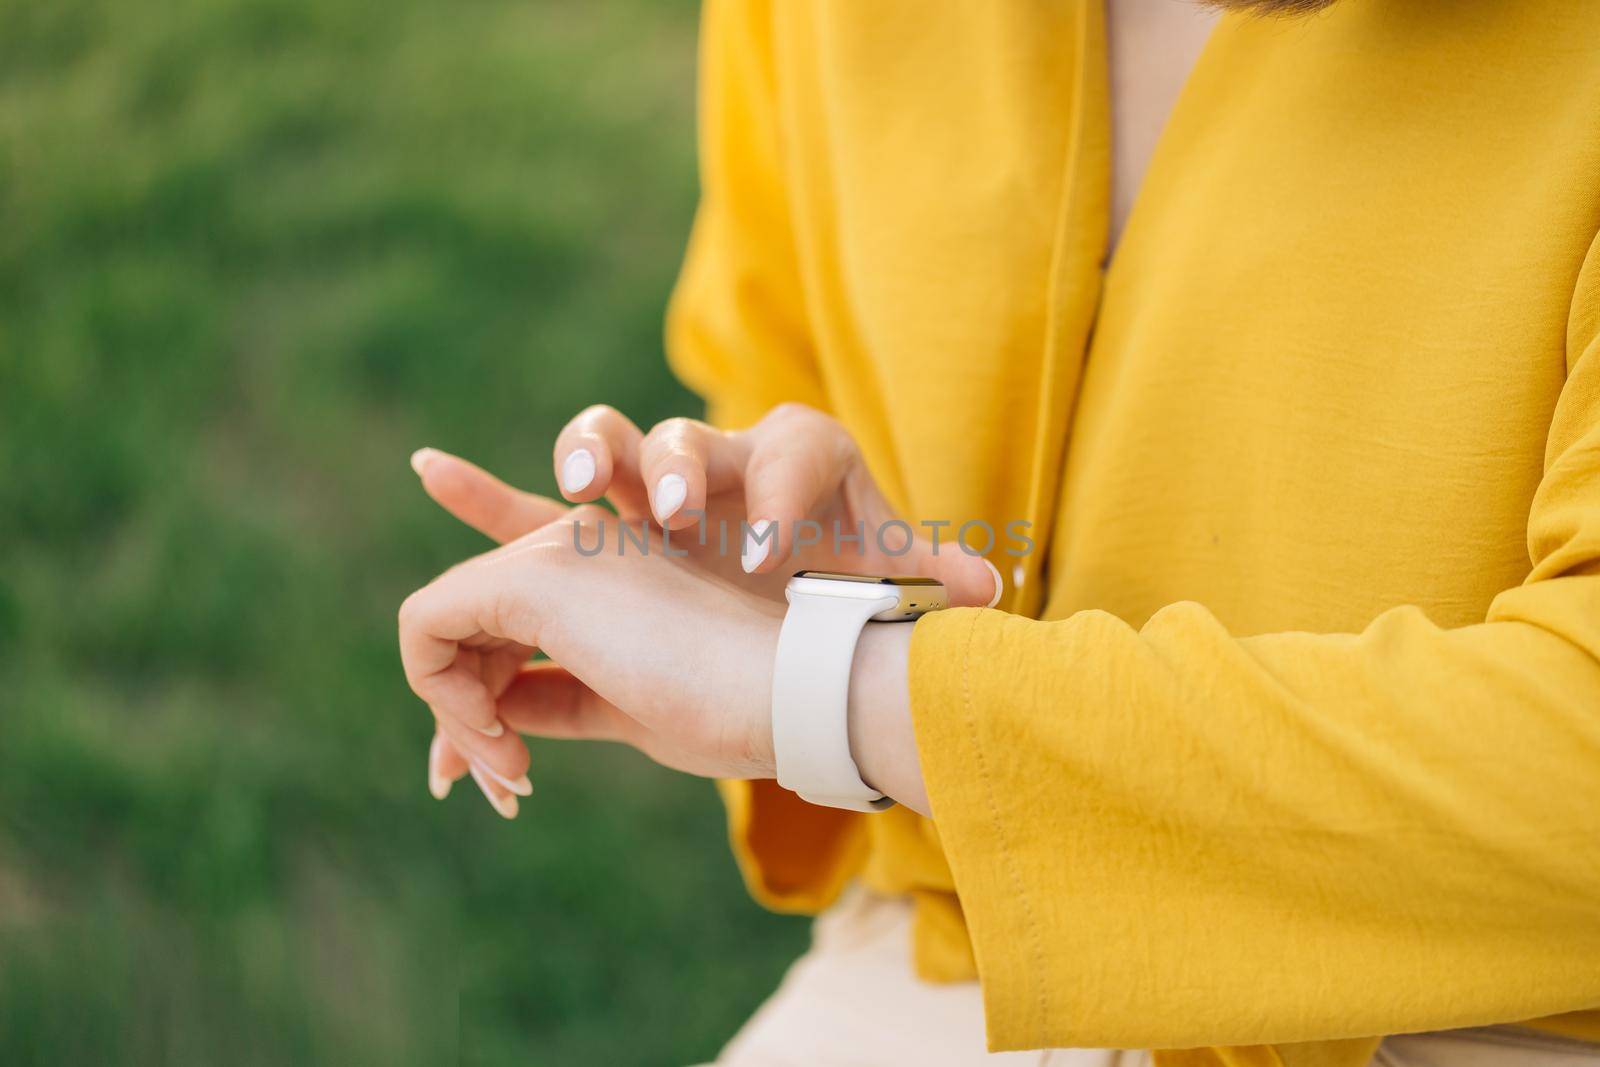 Smart watch on woman's hand outdoor. Woman's hand touching a smartwatch. Female's hand uses of wearable smart watch at outdoor.